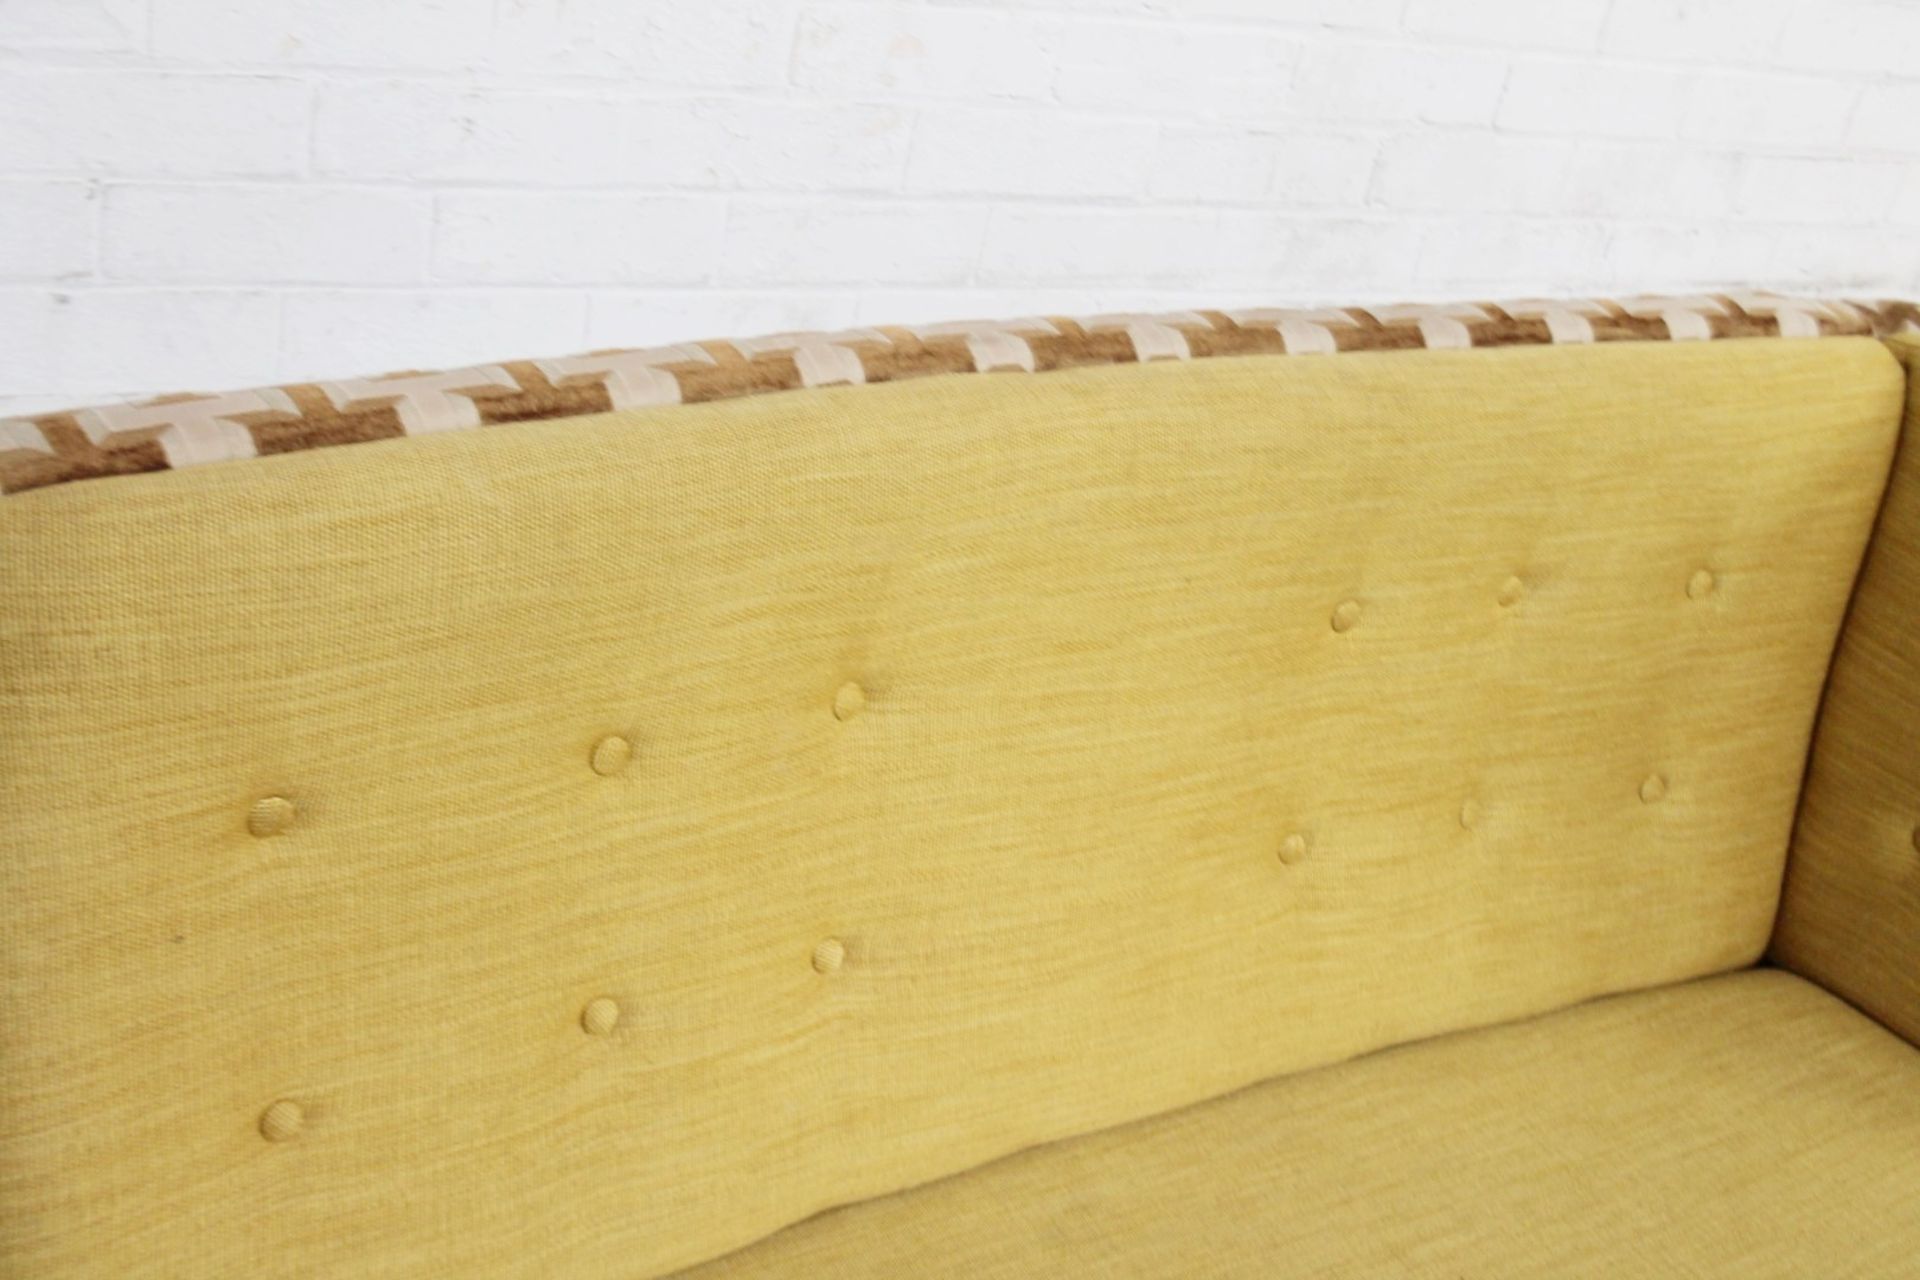 1 x Commercial Freestanding Right-Hand 2-Seater Bench, Upholstered In Premium Gold-Coloured Fabrics, - Image 7 of 9